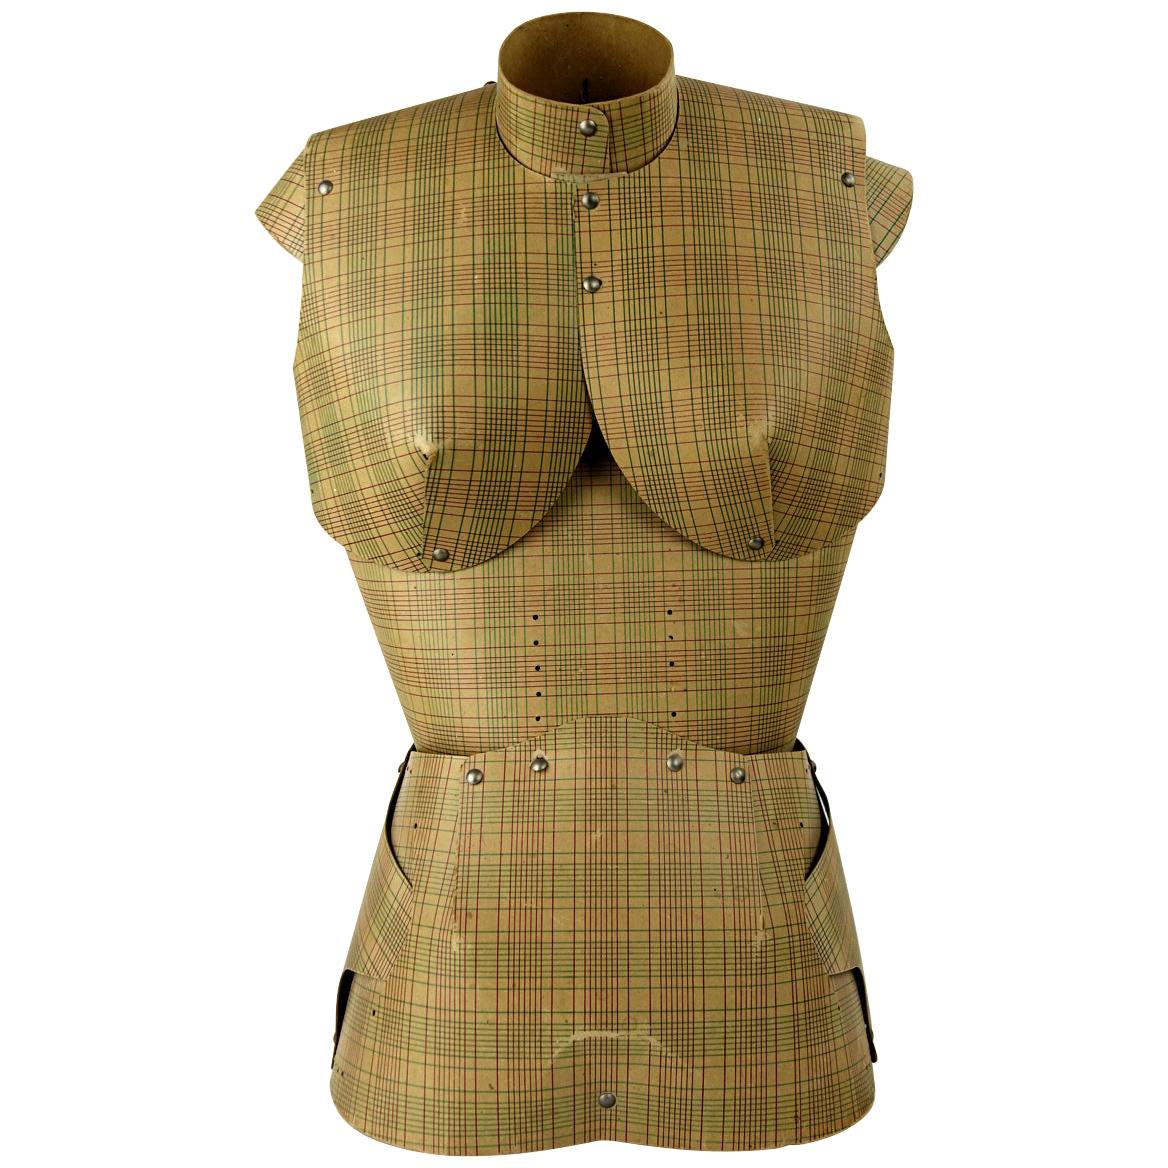 Very Decorative Mannequin or Tailor's Dummy Made of Checkered Thick Cardboard For Sale